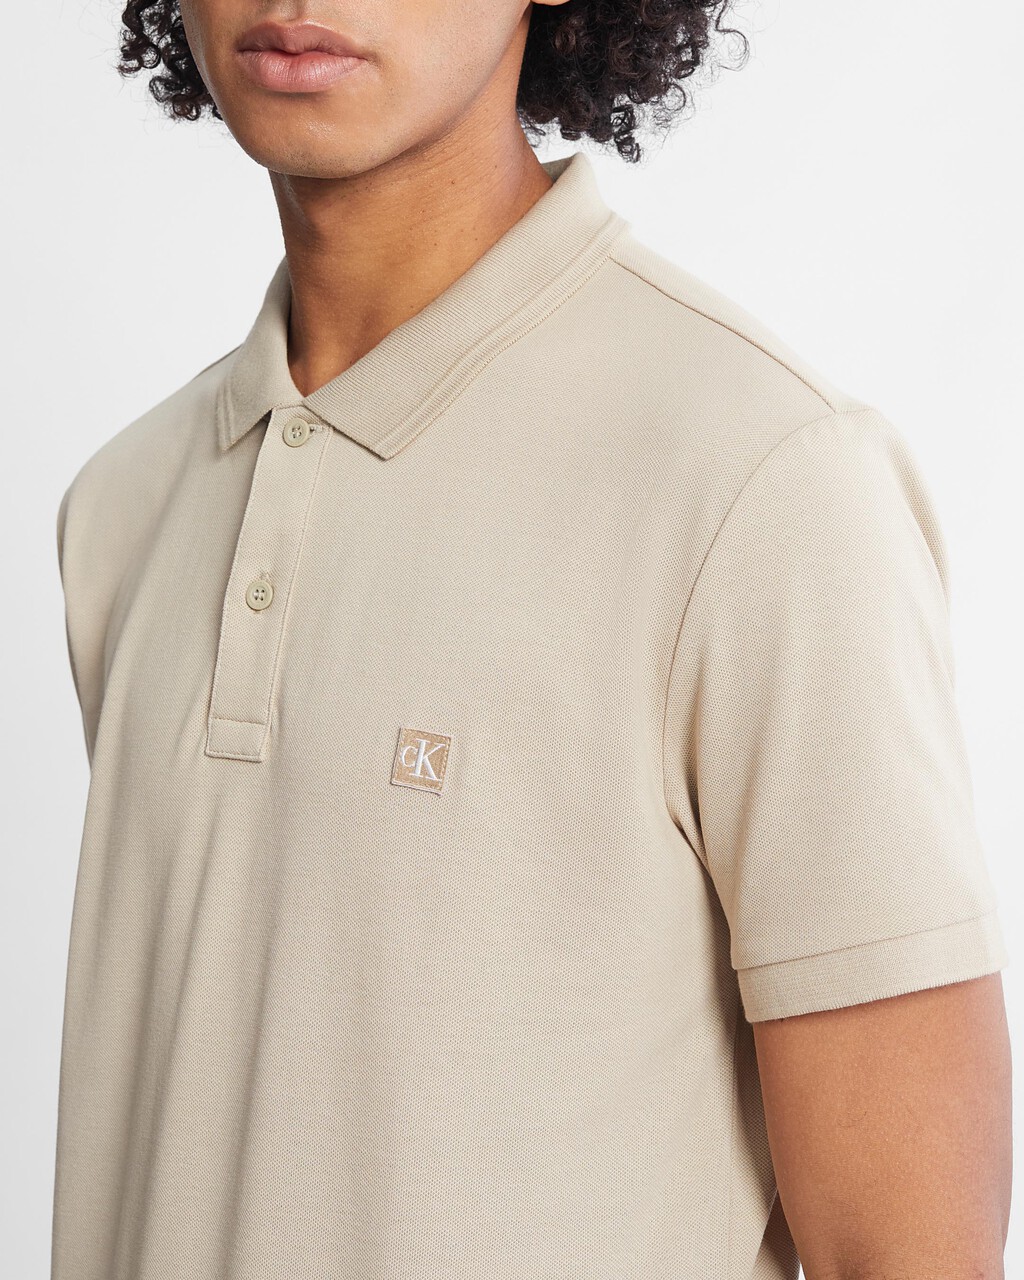 Ck Badge Slim Smooth Cotton Polo, Plaza Taupe, hi-res